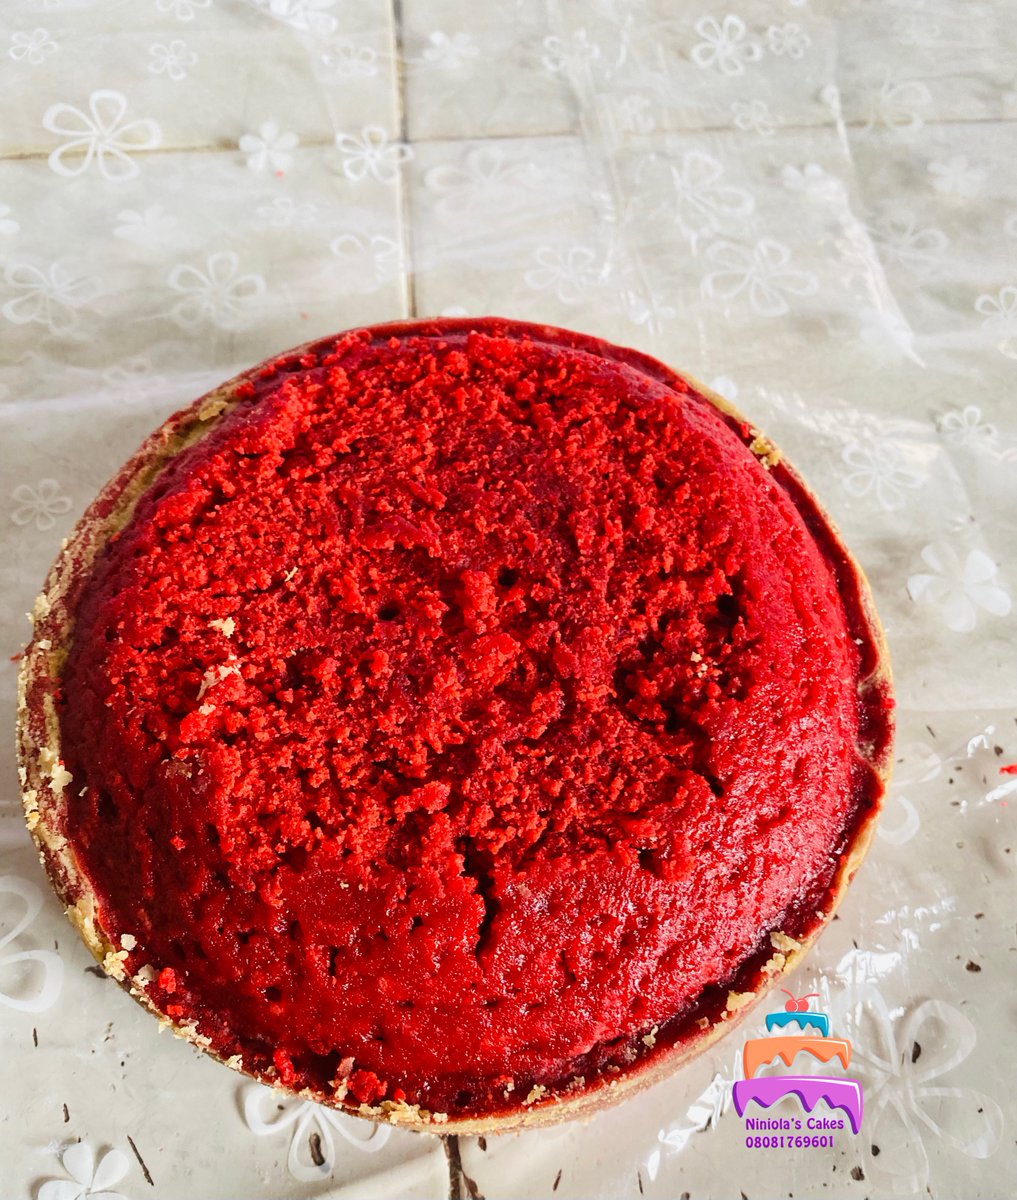 Made a naked 7” redvelvet cake today 🥰
See how moist it looks. 
.
Need a cake in ogunstate, mowe, ibafo etc, make me ur plug